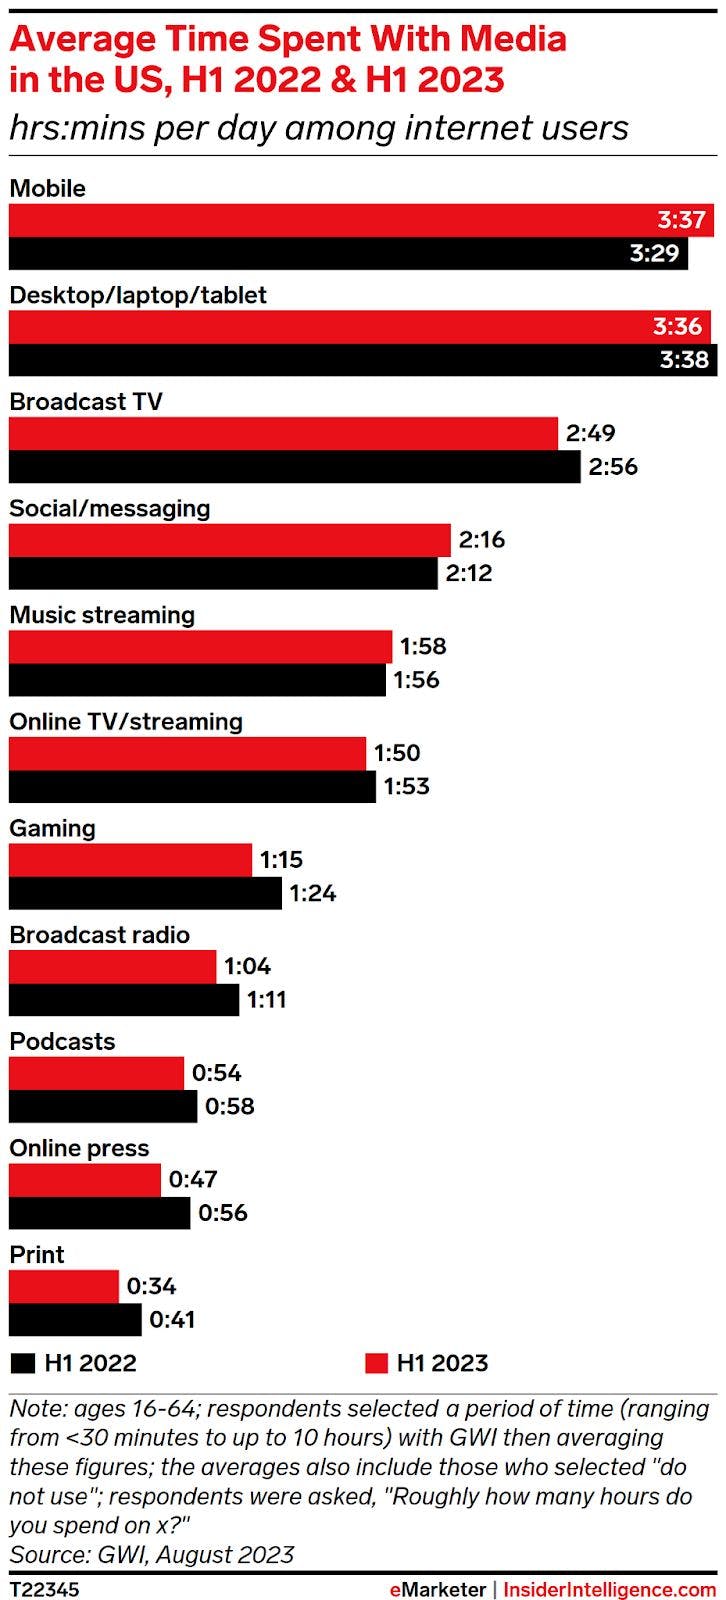 Average time spent with media in the US, H1 2022 and H1 2023